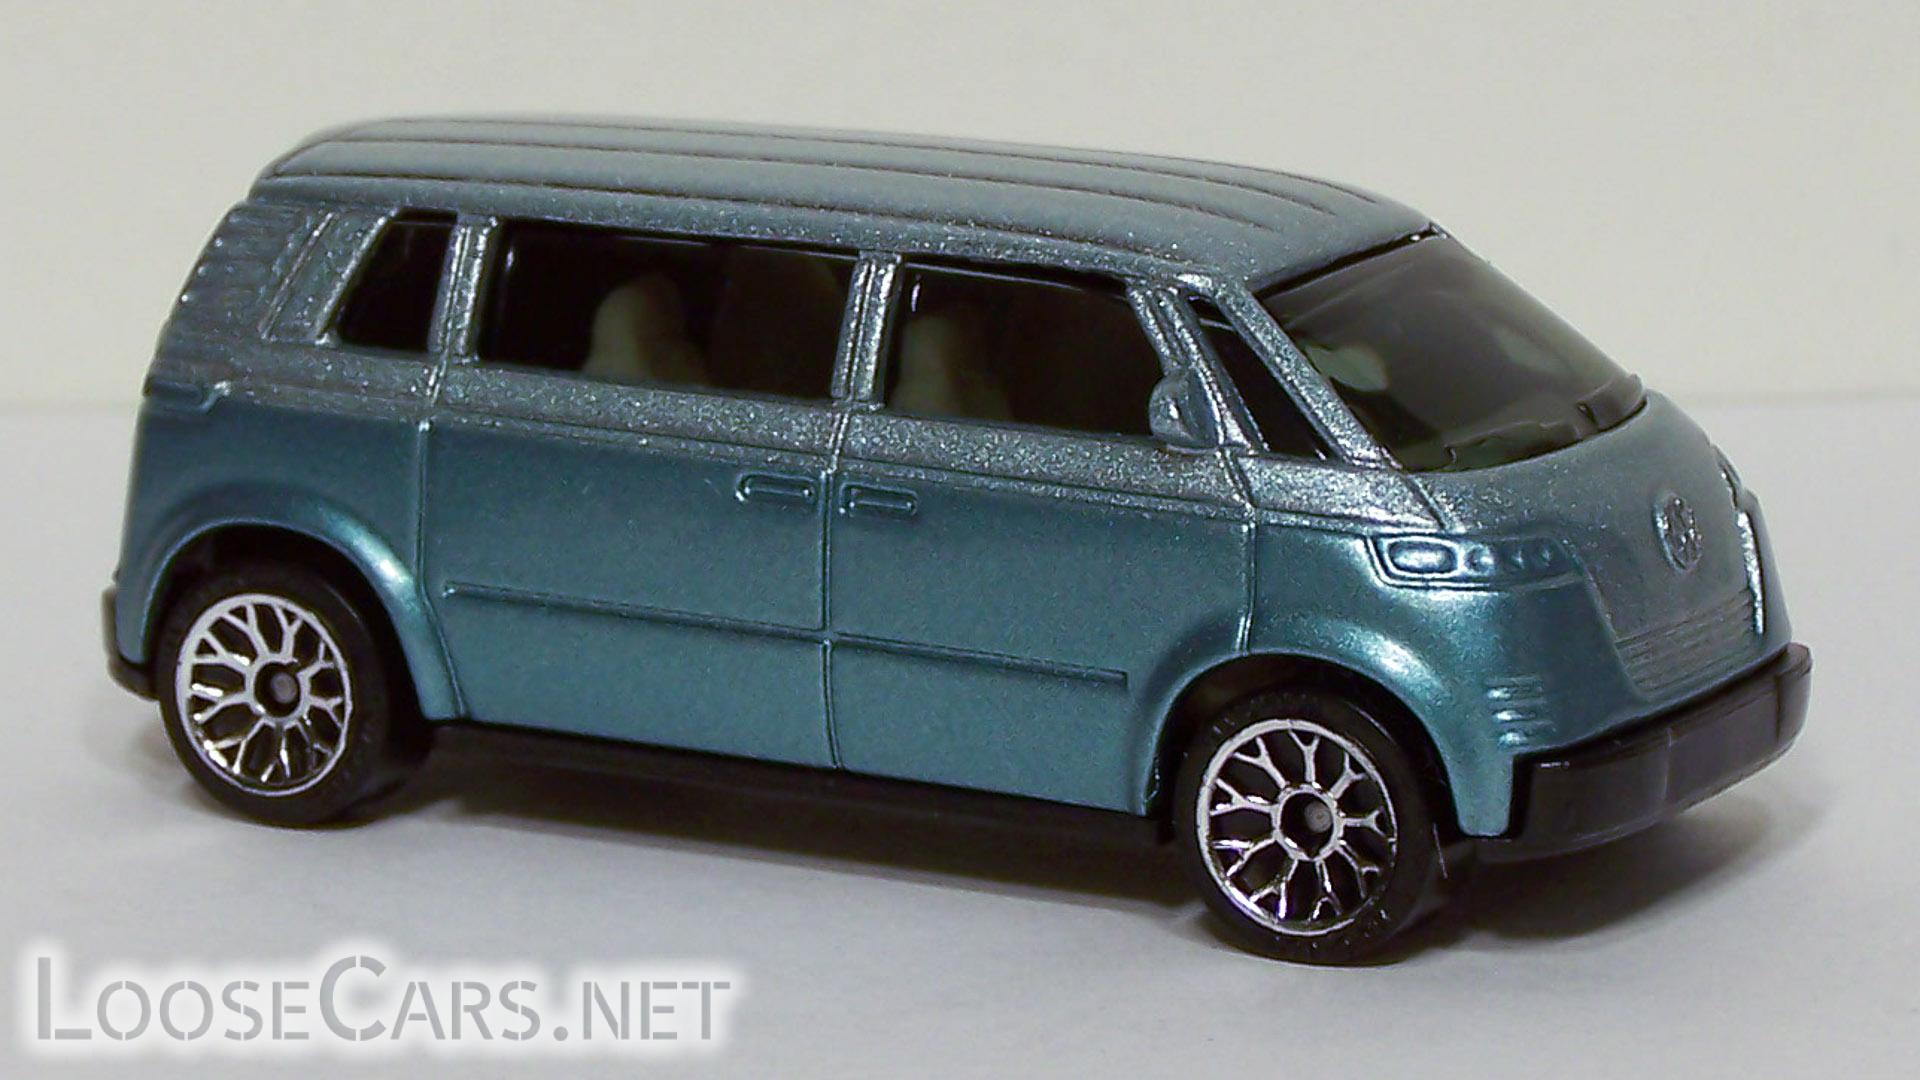 Matchbox Volkswagen Microbus 2002 72 Kids' Cars of the Year - Front Right